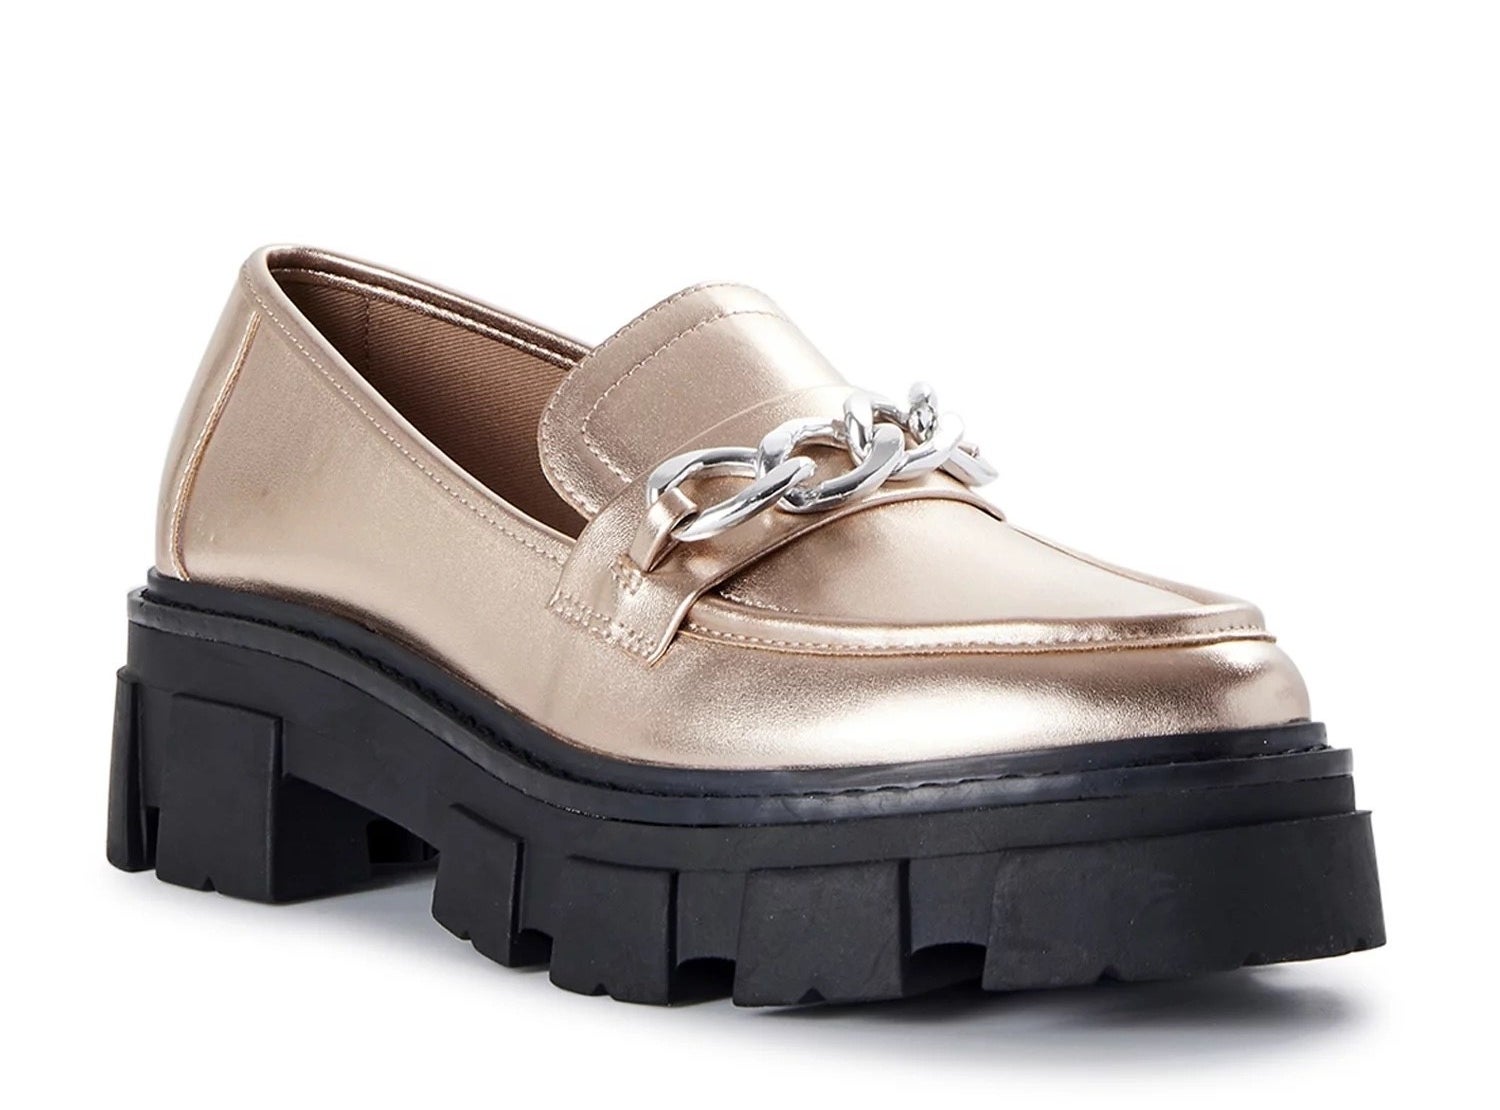 A pair of gold loafers with black lug sole